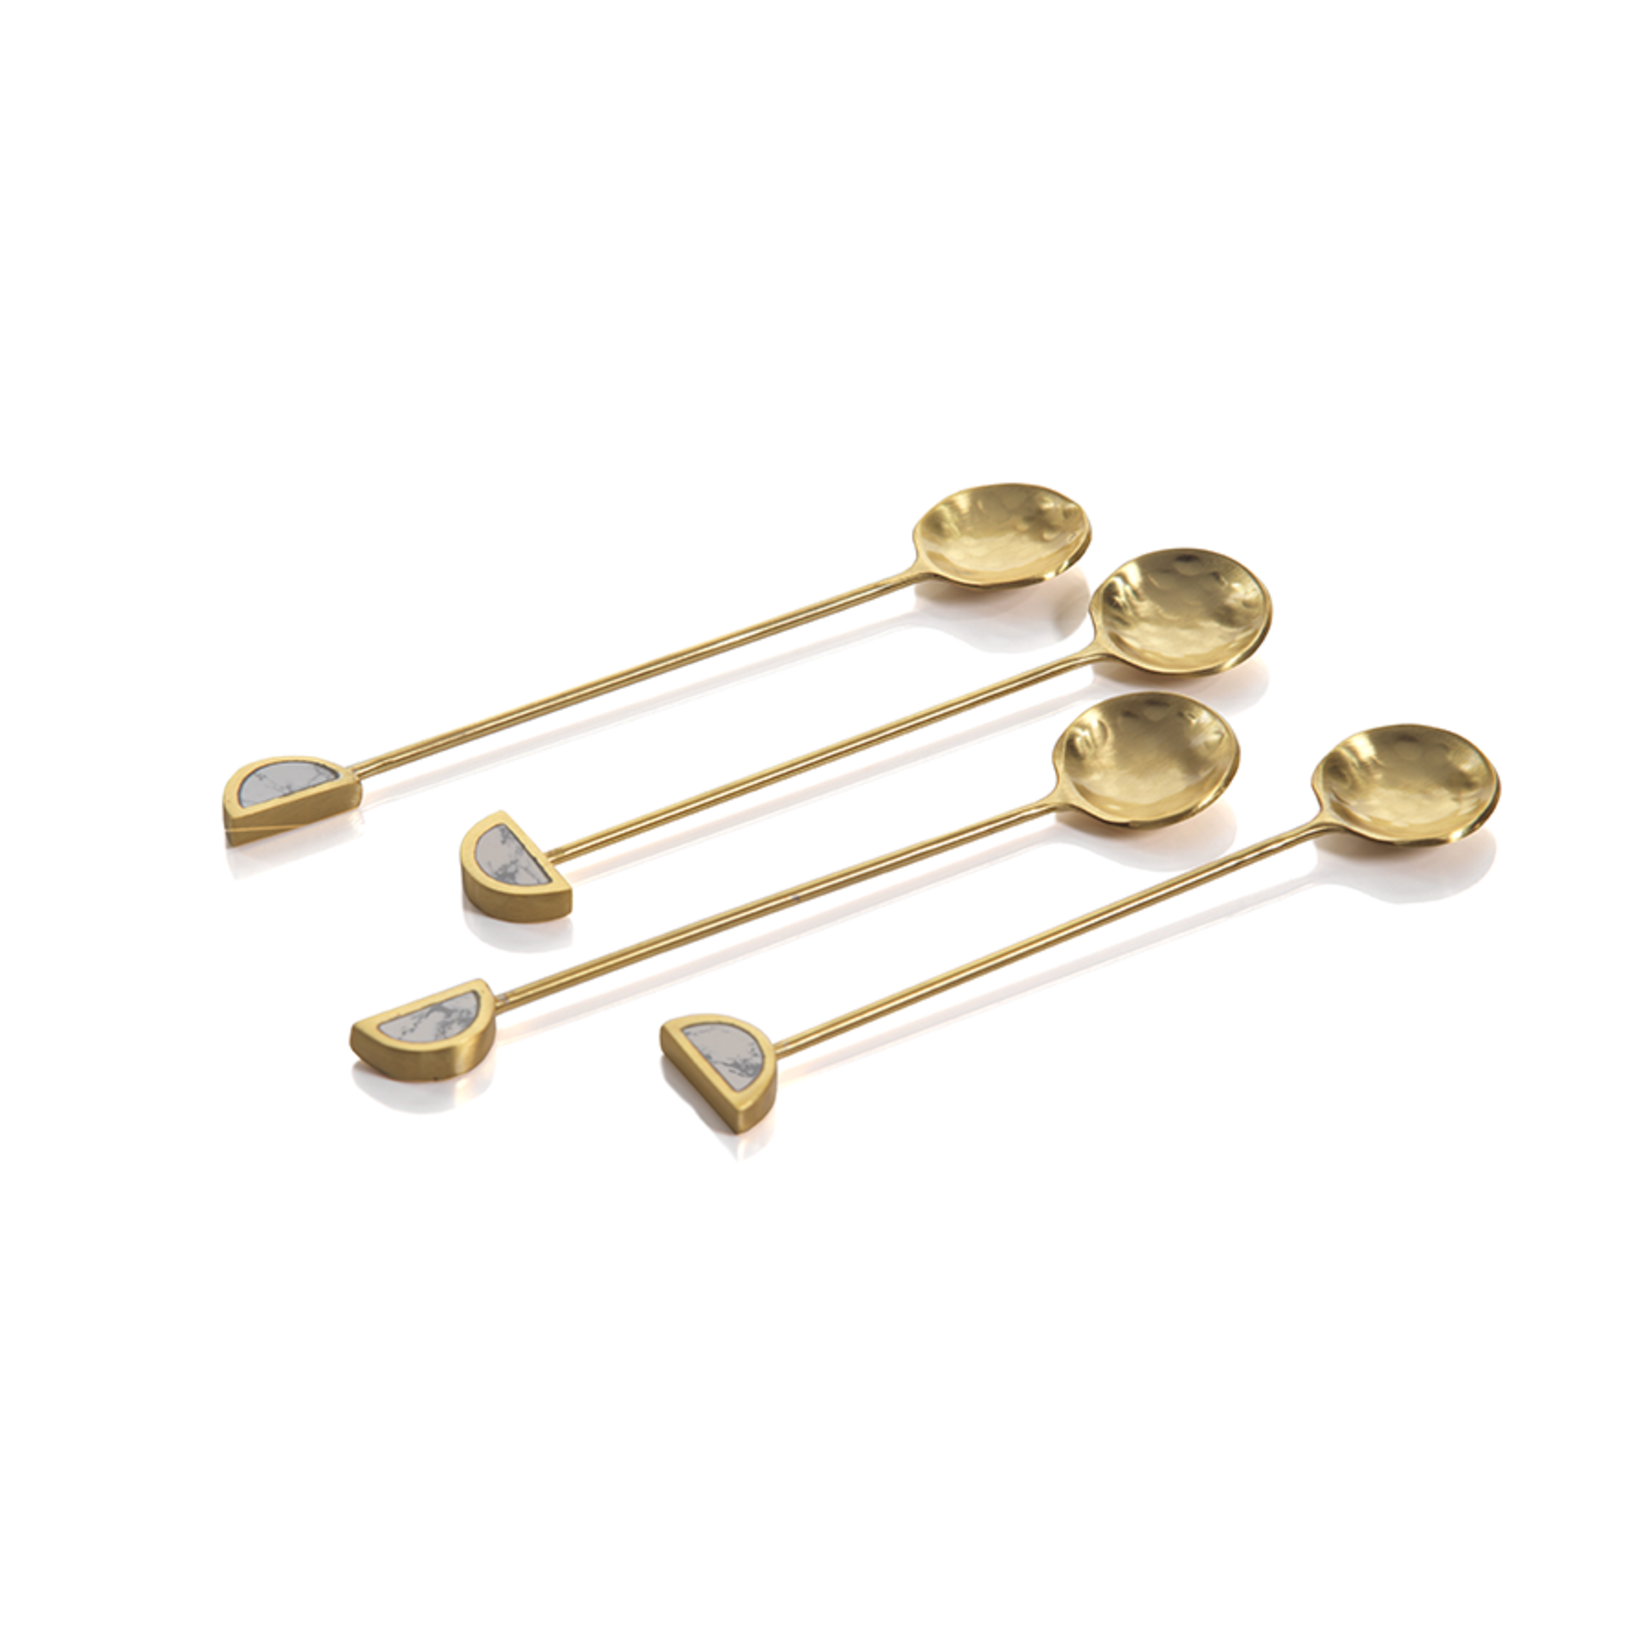 zodax Set of 4 Fez Small Tea Spoons - Gold and White